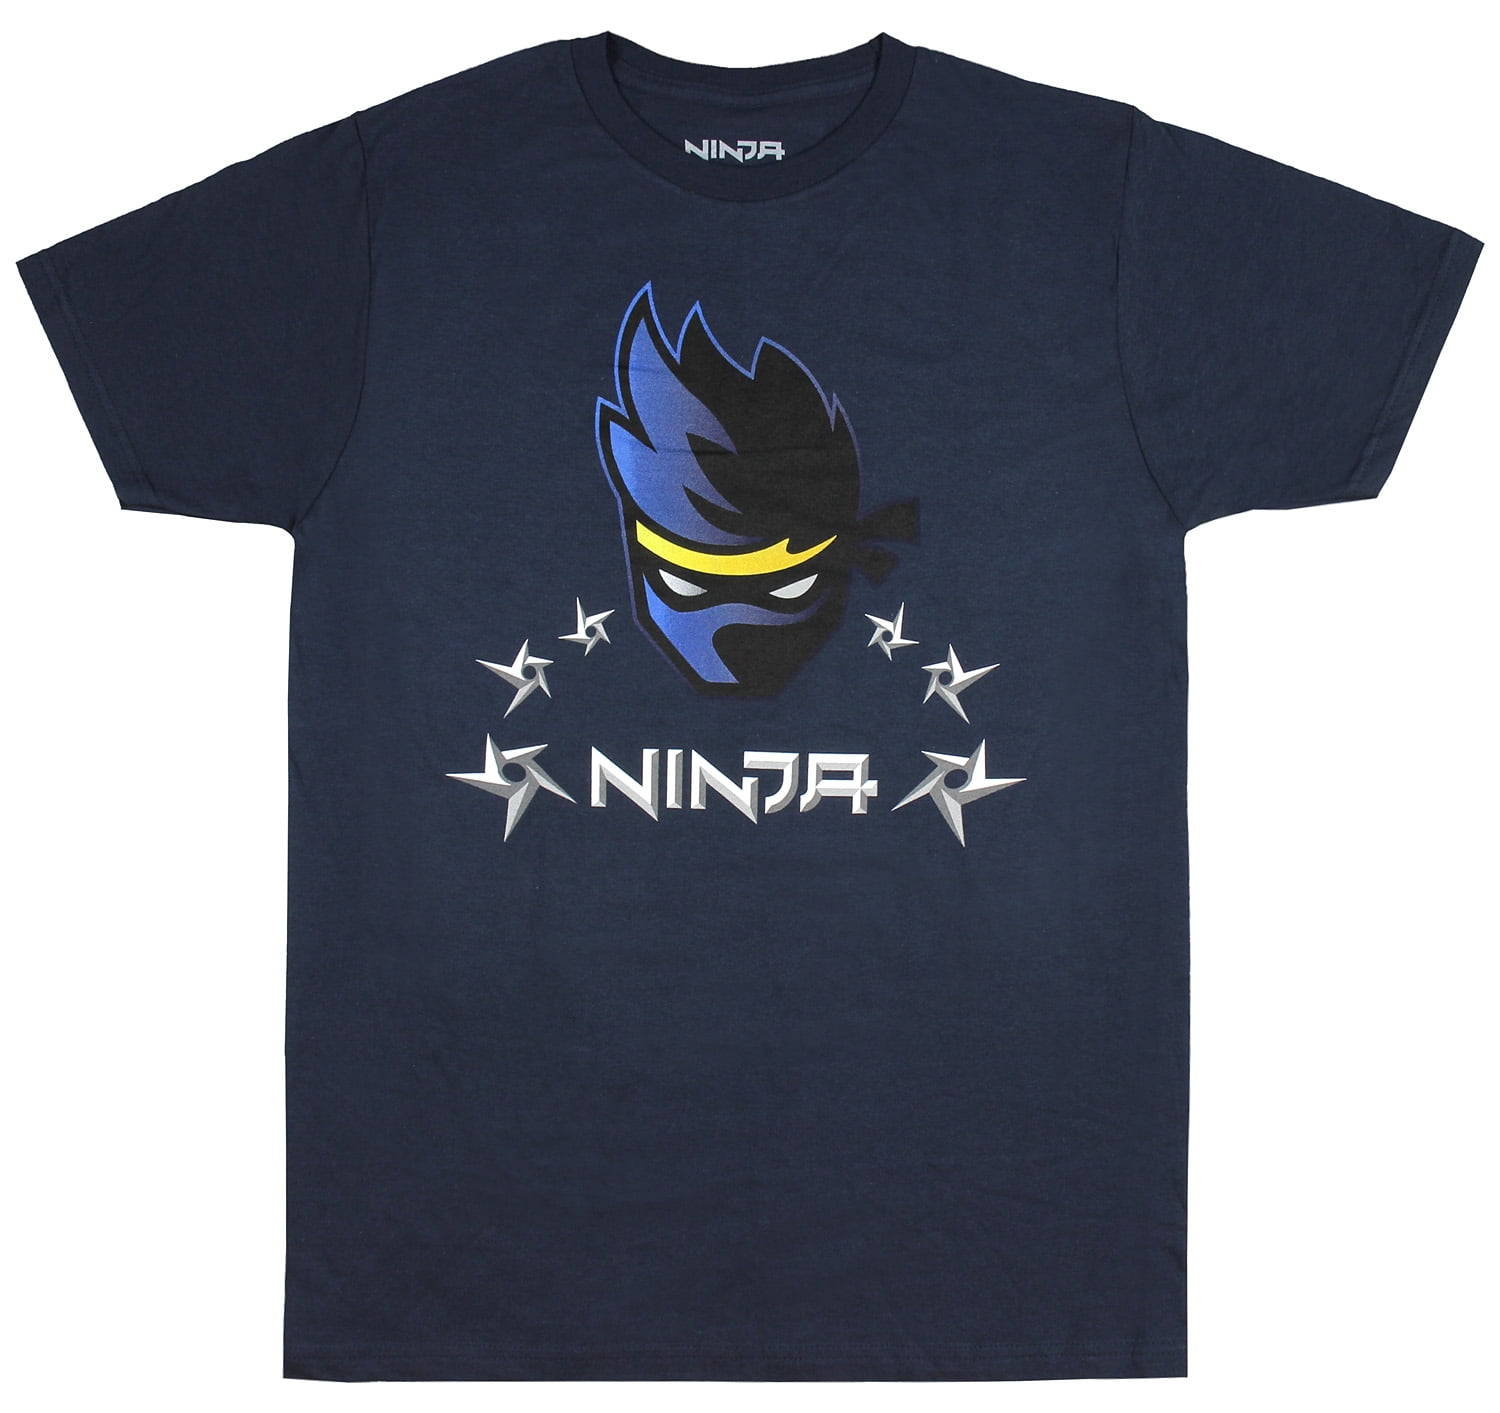 Ninja Tee Front And Back Design T-Shirt Kids Adults Fortnite Youtuber Twitch 